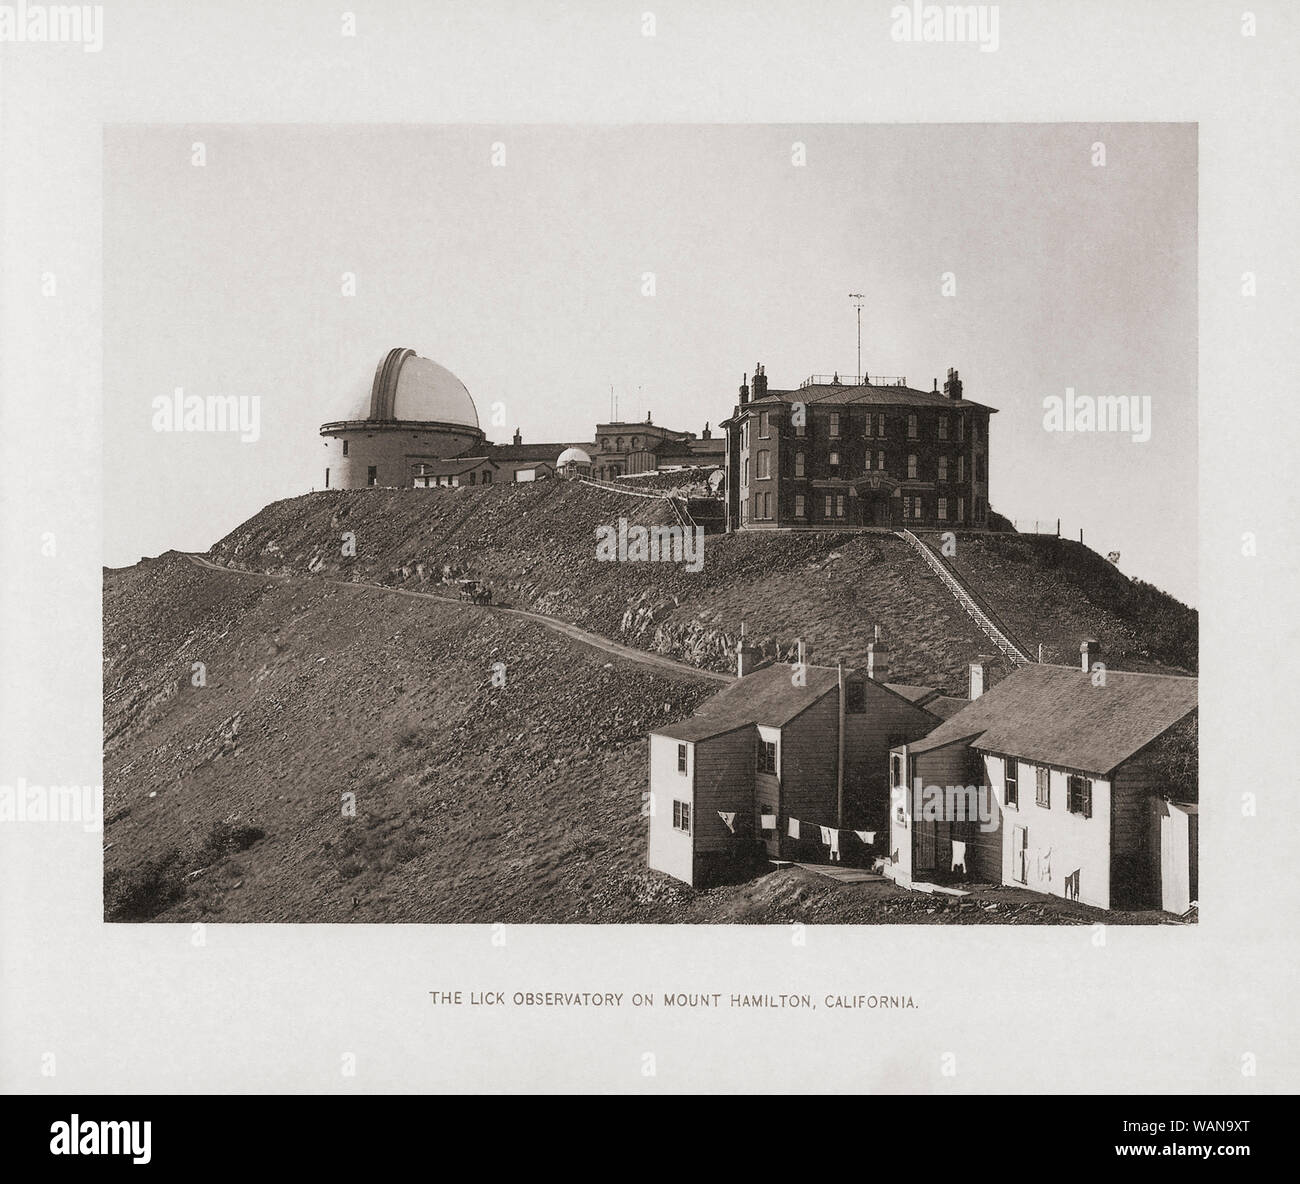 The Lick Observatory, near San Jose, California, USA in the late 19th century.  From the book The United States of America - One Hundred Albertype Illustrations From Recent Negatives of the Most Noted Scenes of Our Country, published 1893. Stock Photo